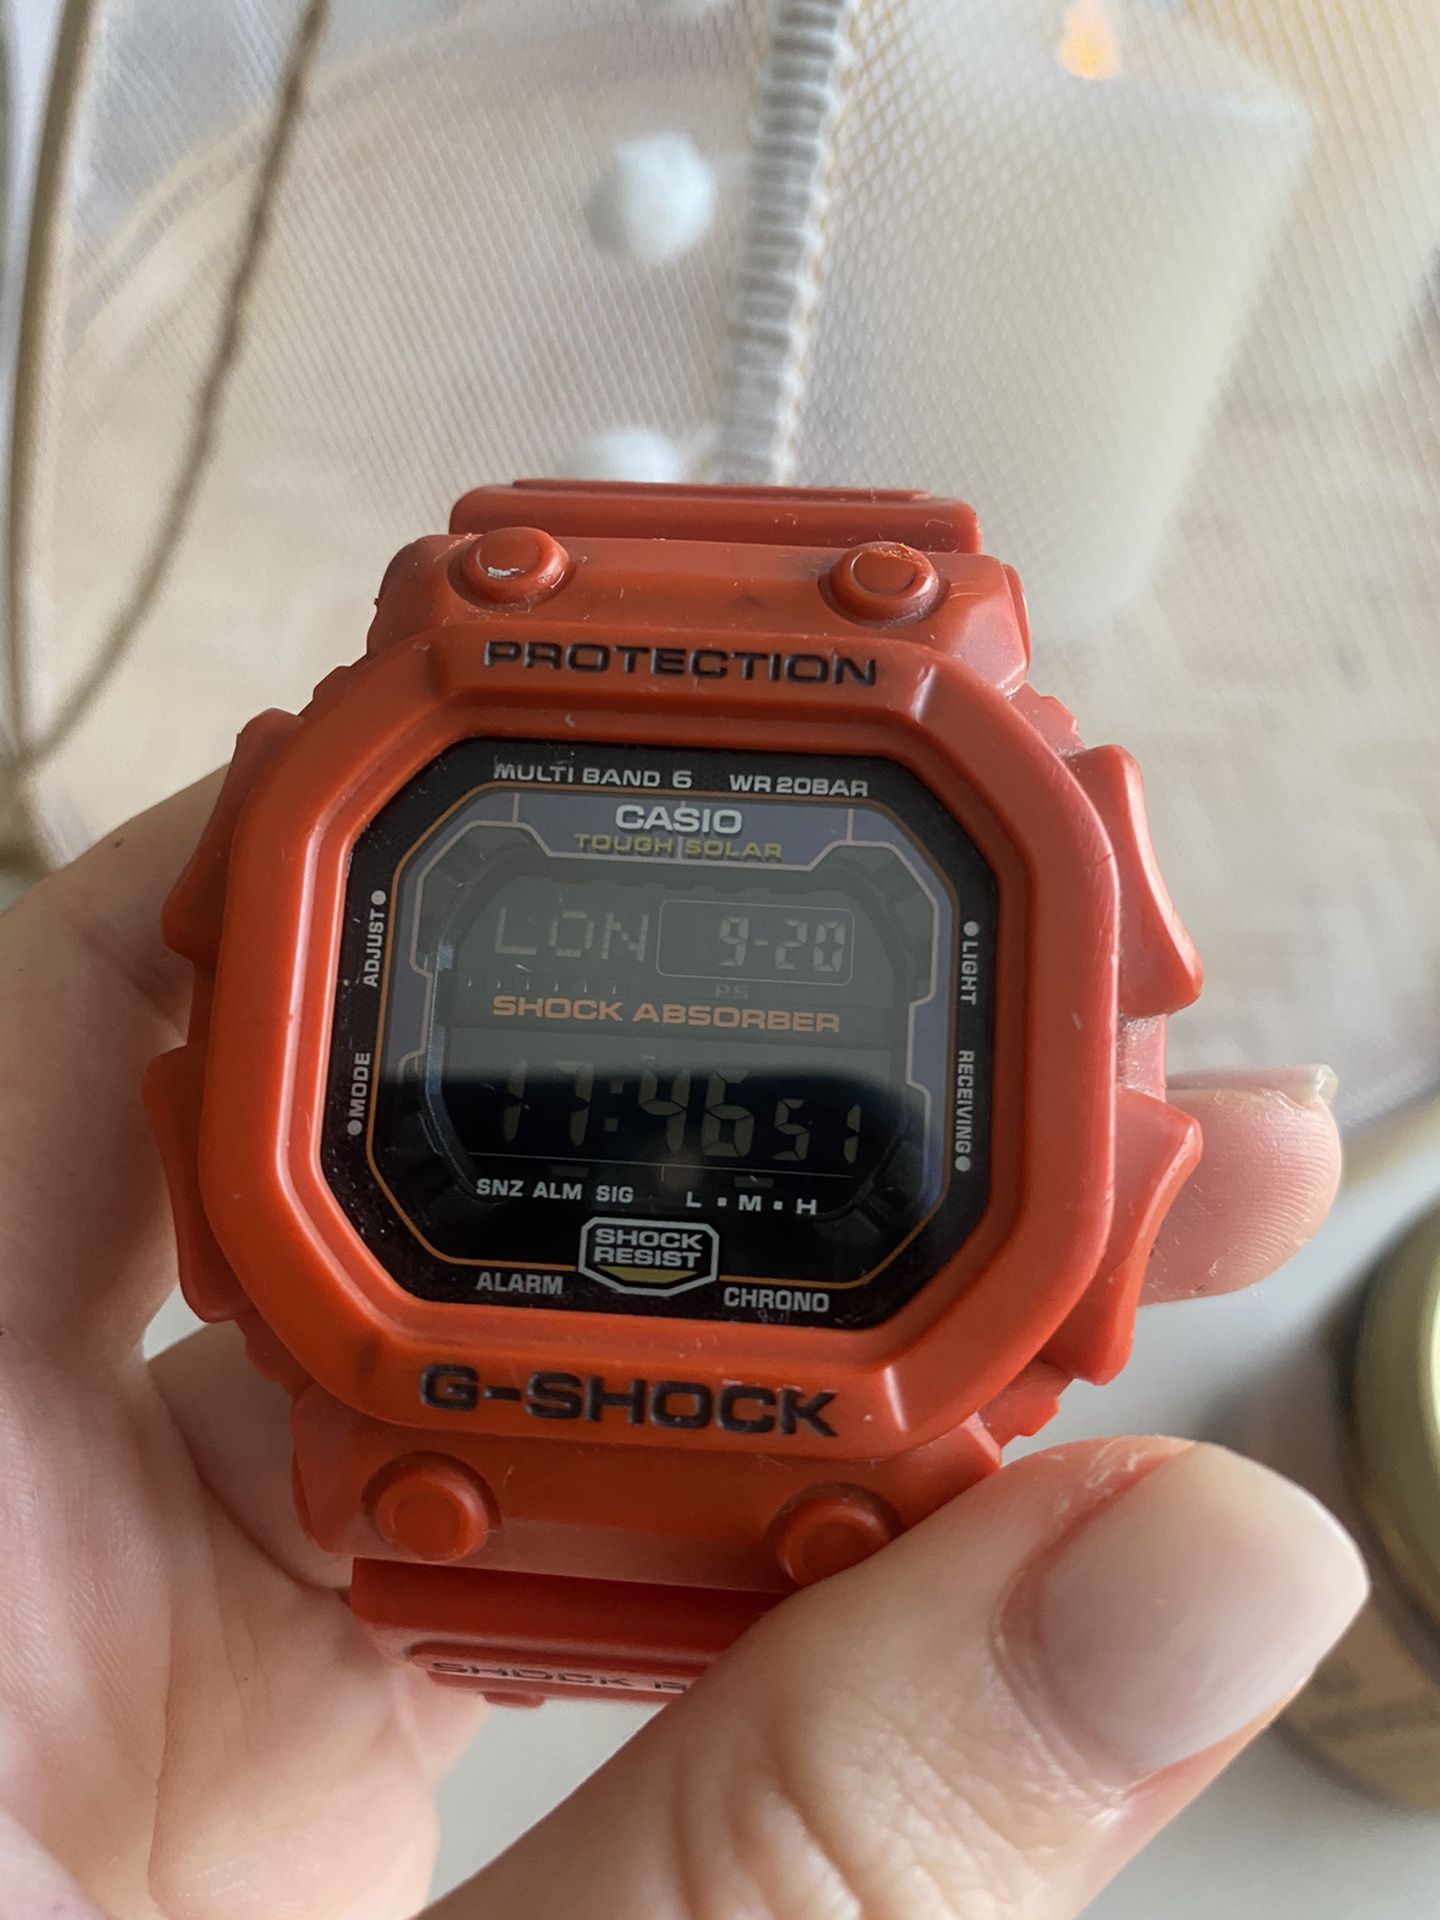 Casio - G-SHOCK protection ( watch )